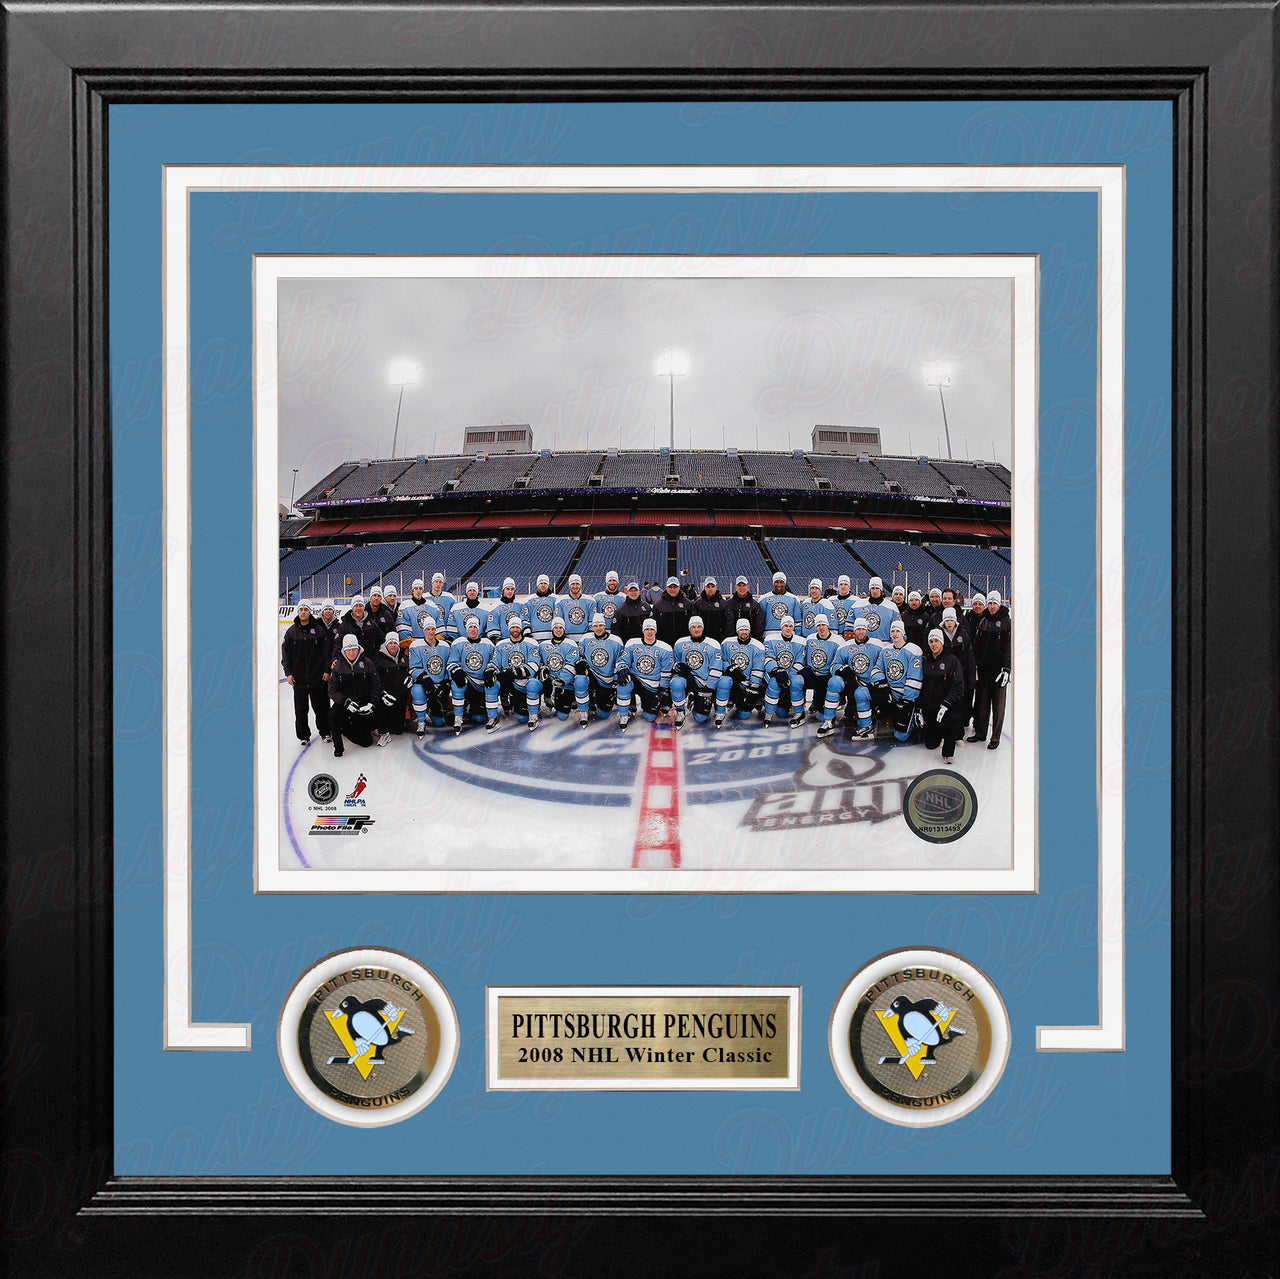 Pittsburgh Penguins 2008 Winter Classic Line-Up 8" x 10" Framed Hockey Photo